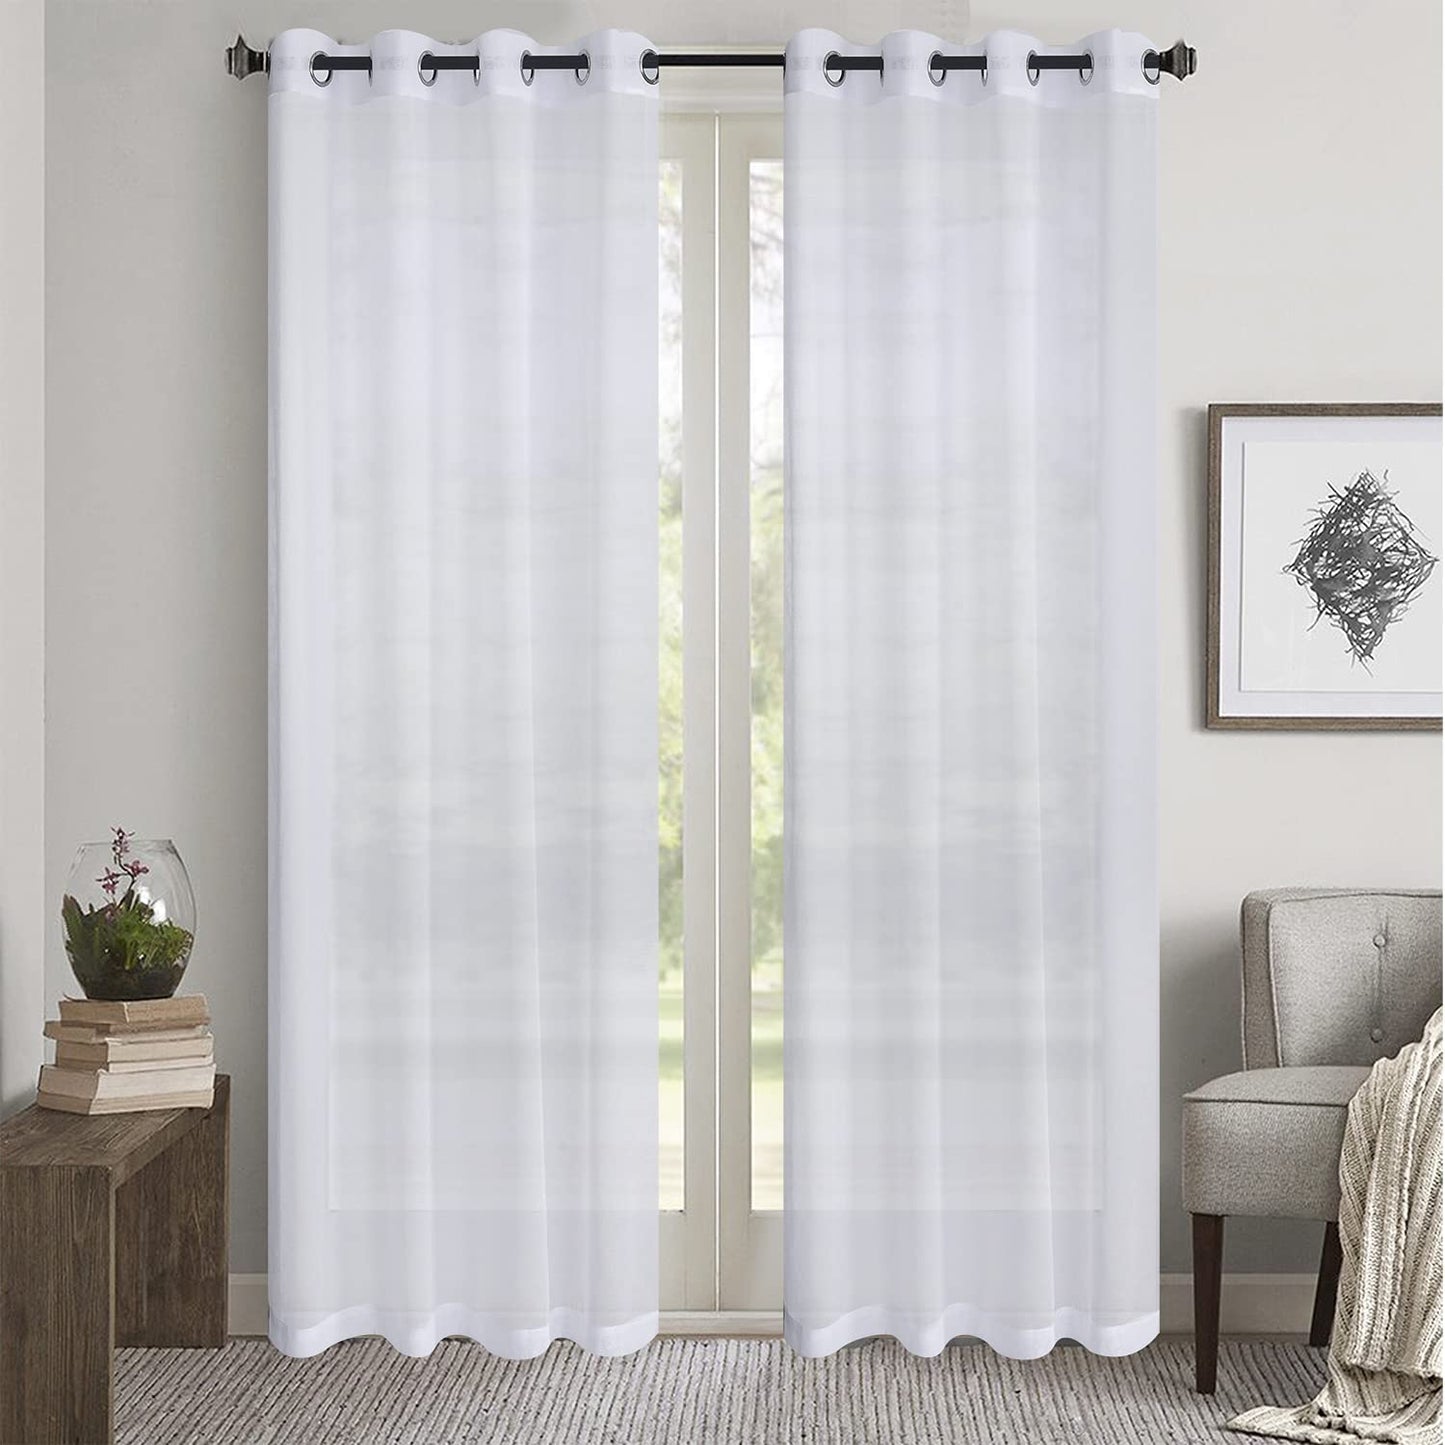 Semi Sheer Solid Voile Curtain for Living Room Bedroom Patio Door,Sunlight Filtering Protect Privacy